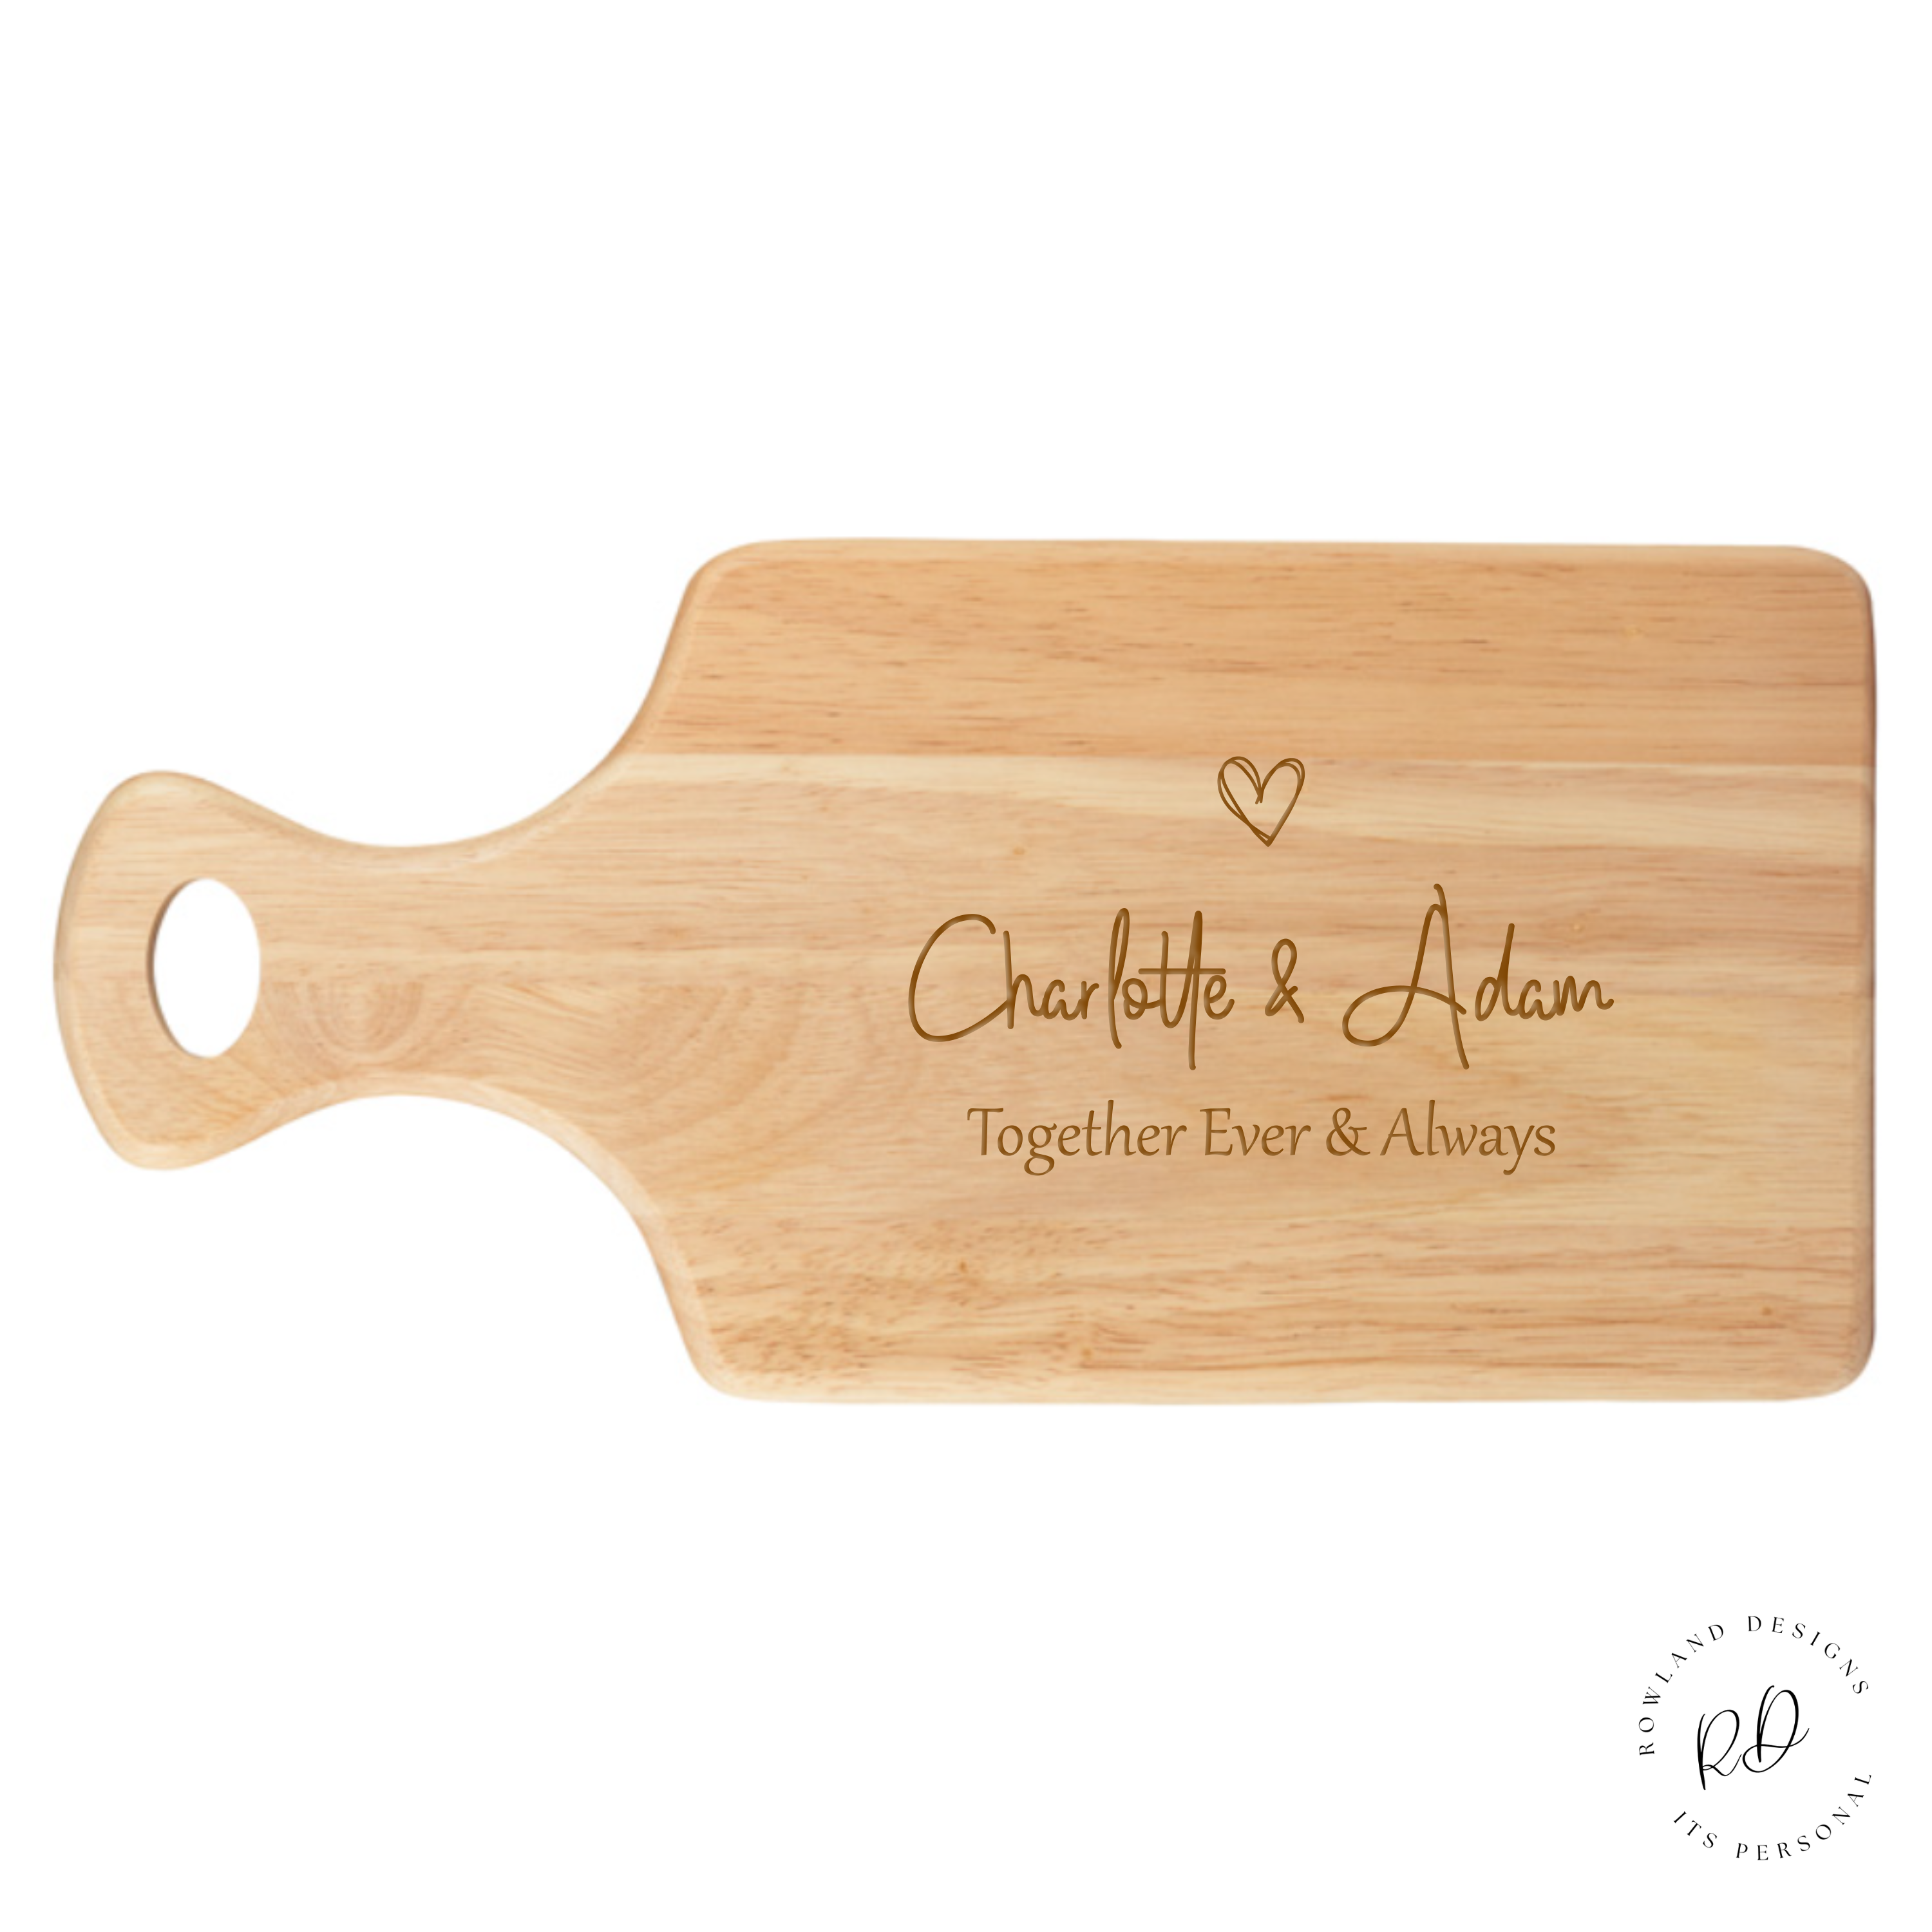 Personalized Serving Board with custom engraving and heart motif